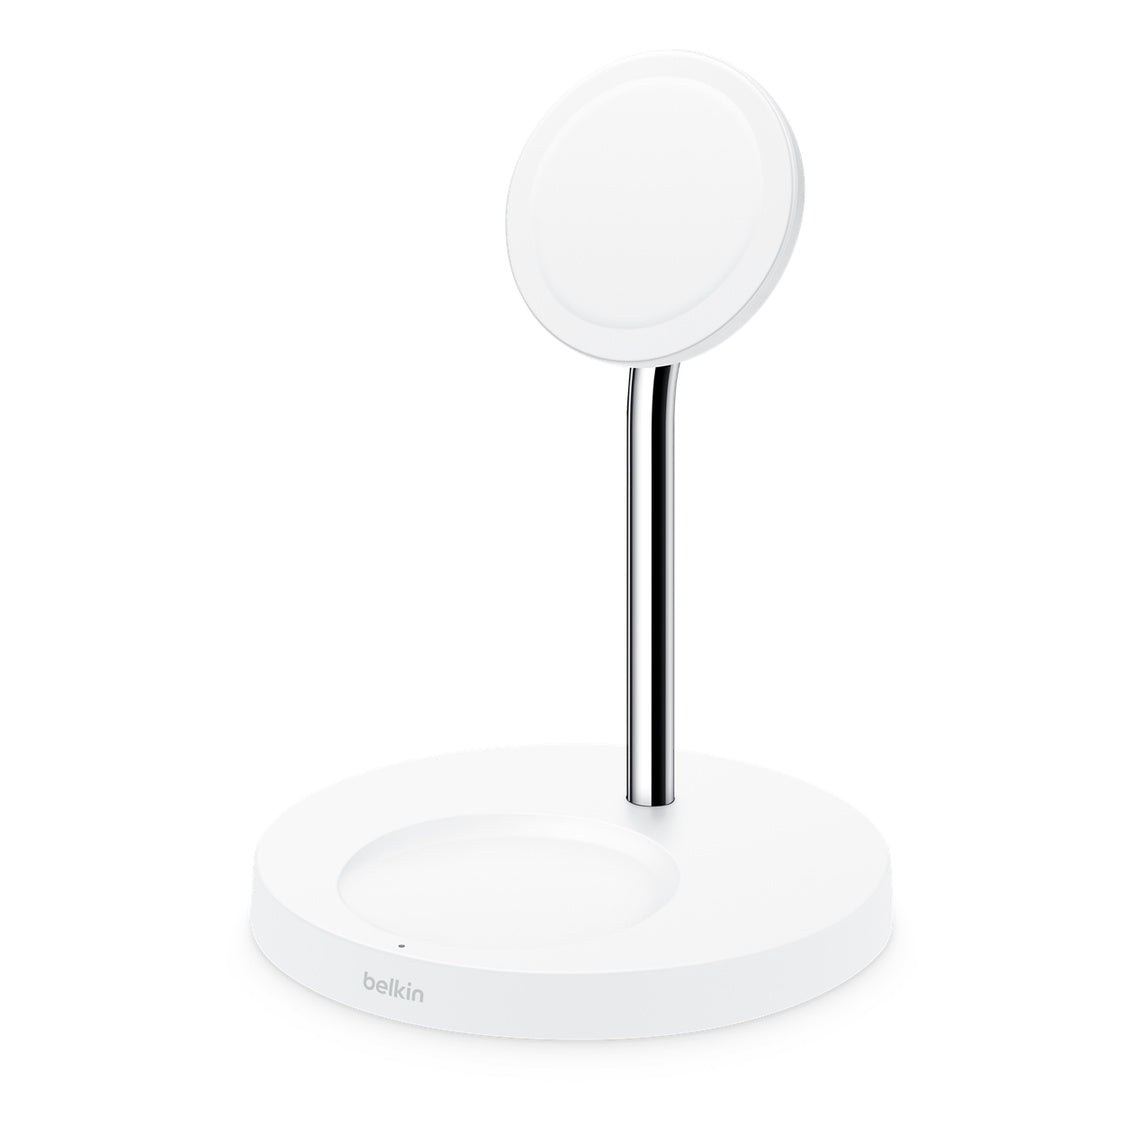 Belkin BoostCharge Pro MagSafe 2-in-1 with 15W Wireless Charger Stand